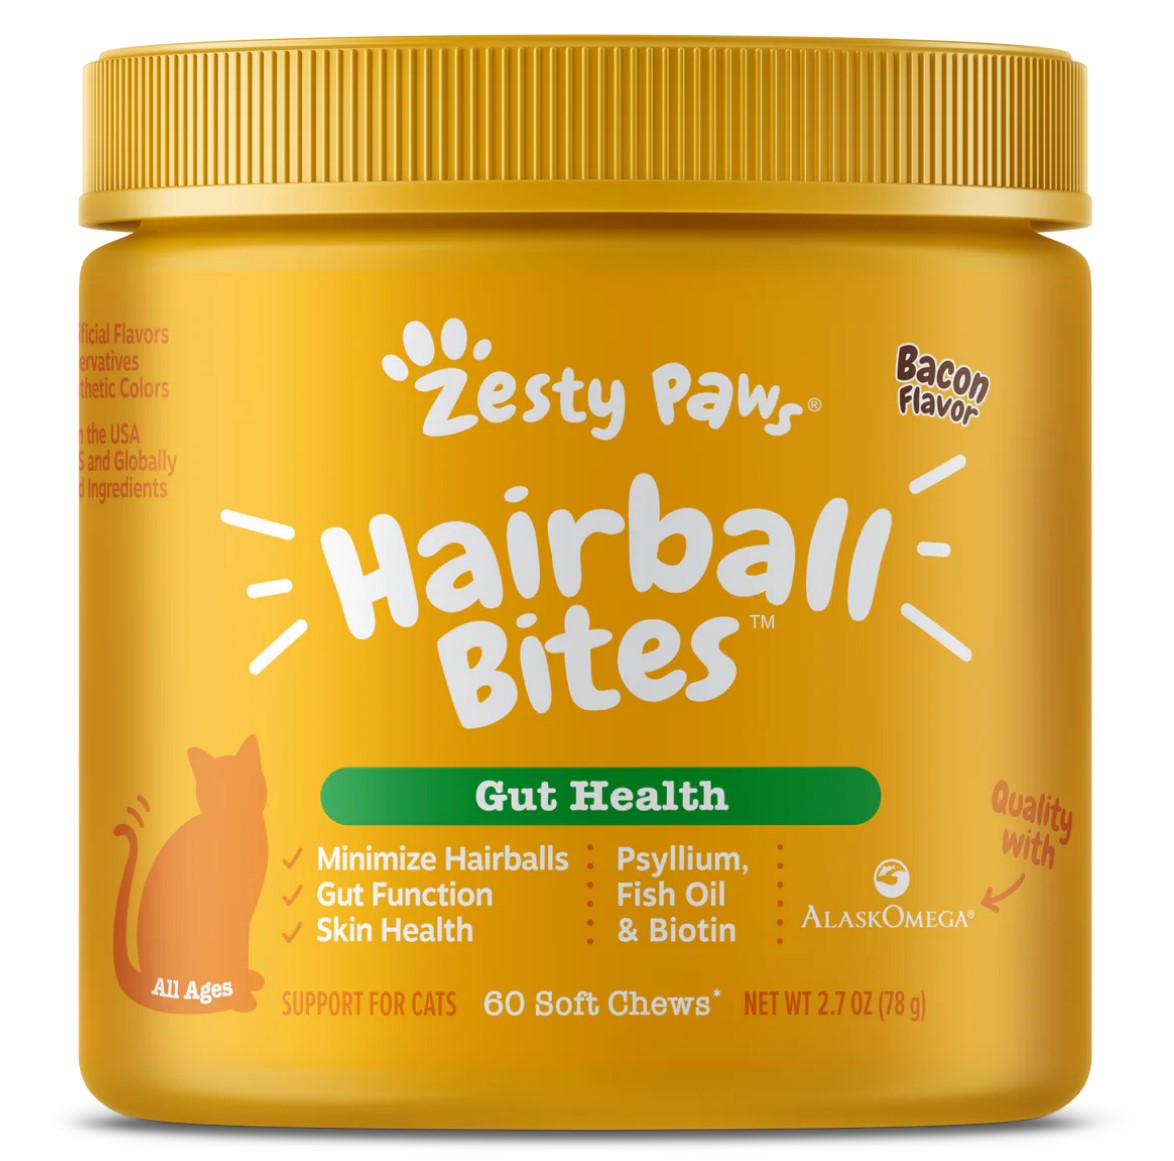 Zesty Paws Hairball Bites™ for Cats